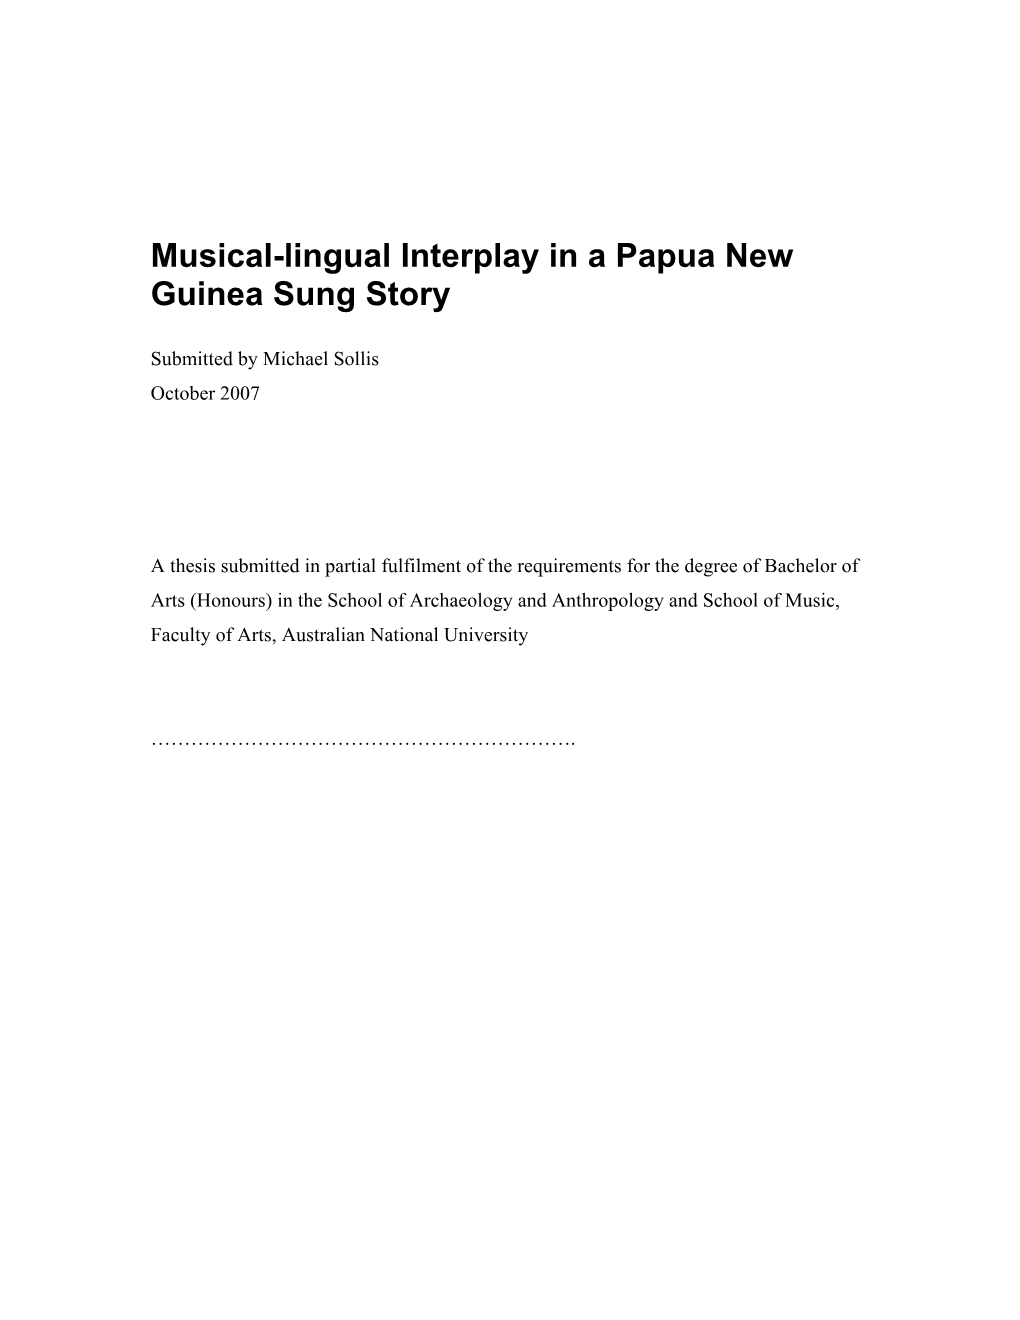 Musical-Lingual Interplay in a Papua New Guinea Sung Story